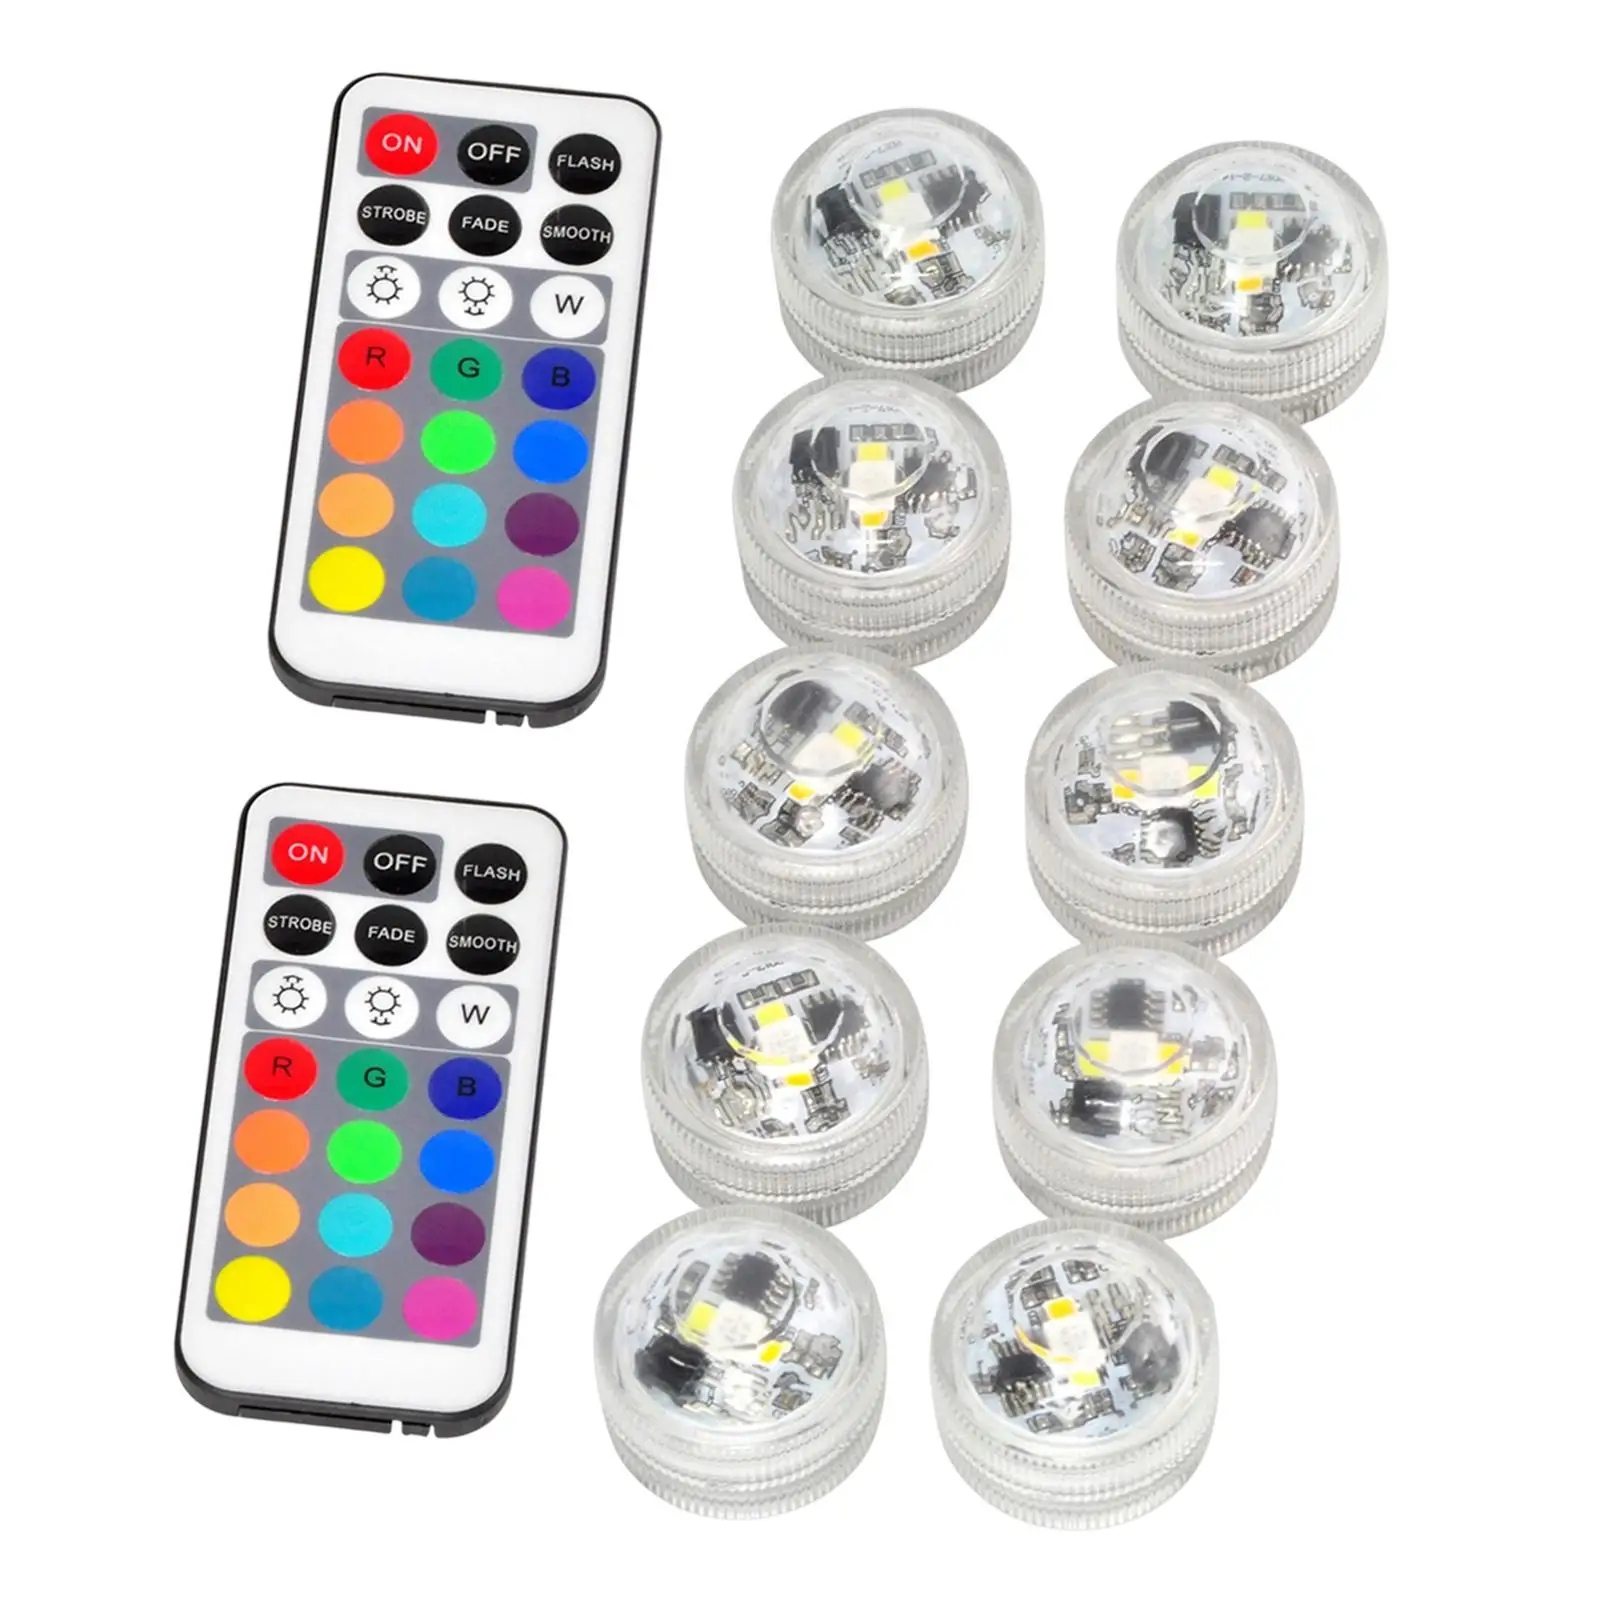 10x LED Lights Submersible Remote Control RGB Lamp Fountains Hot Tub